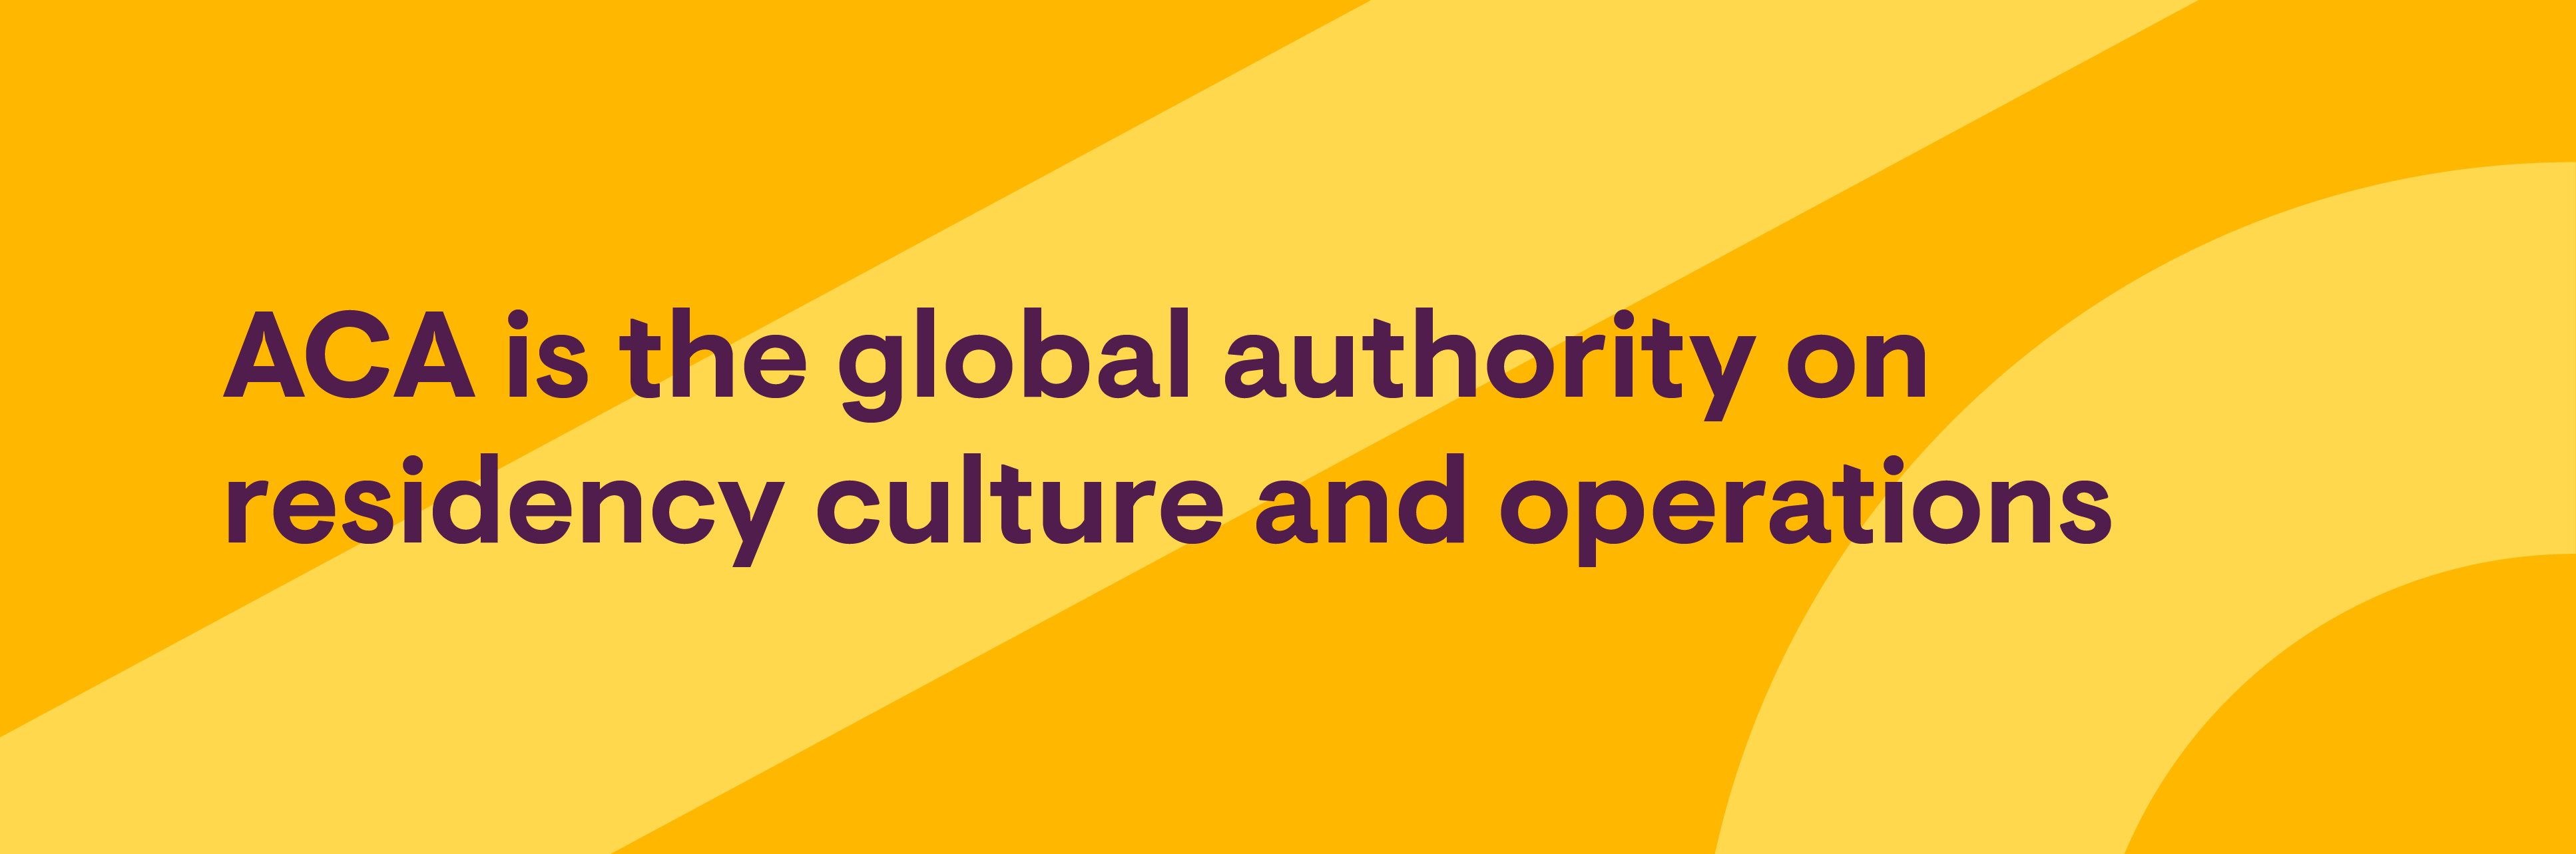 Text says ACA is the global authority on residency culture and operations